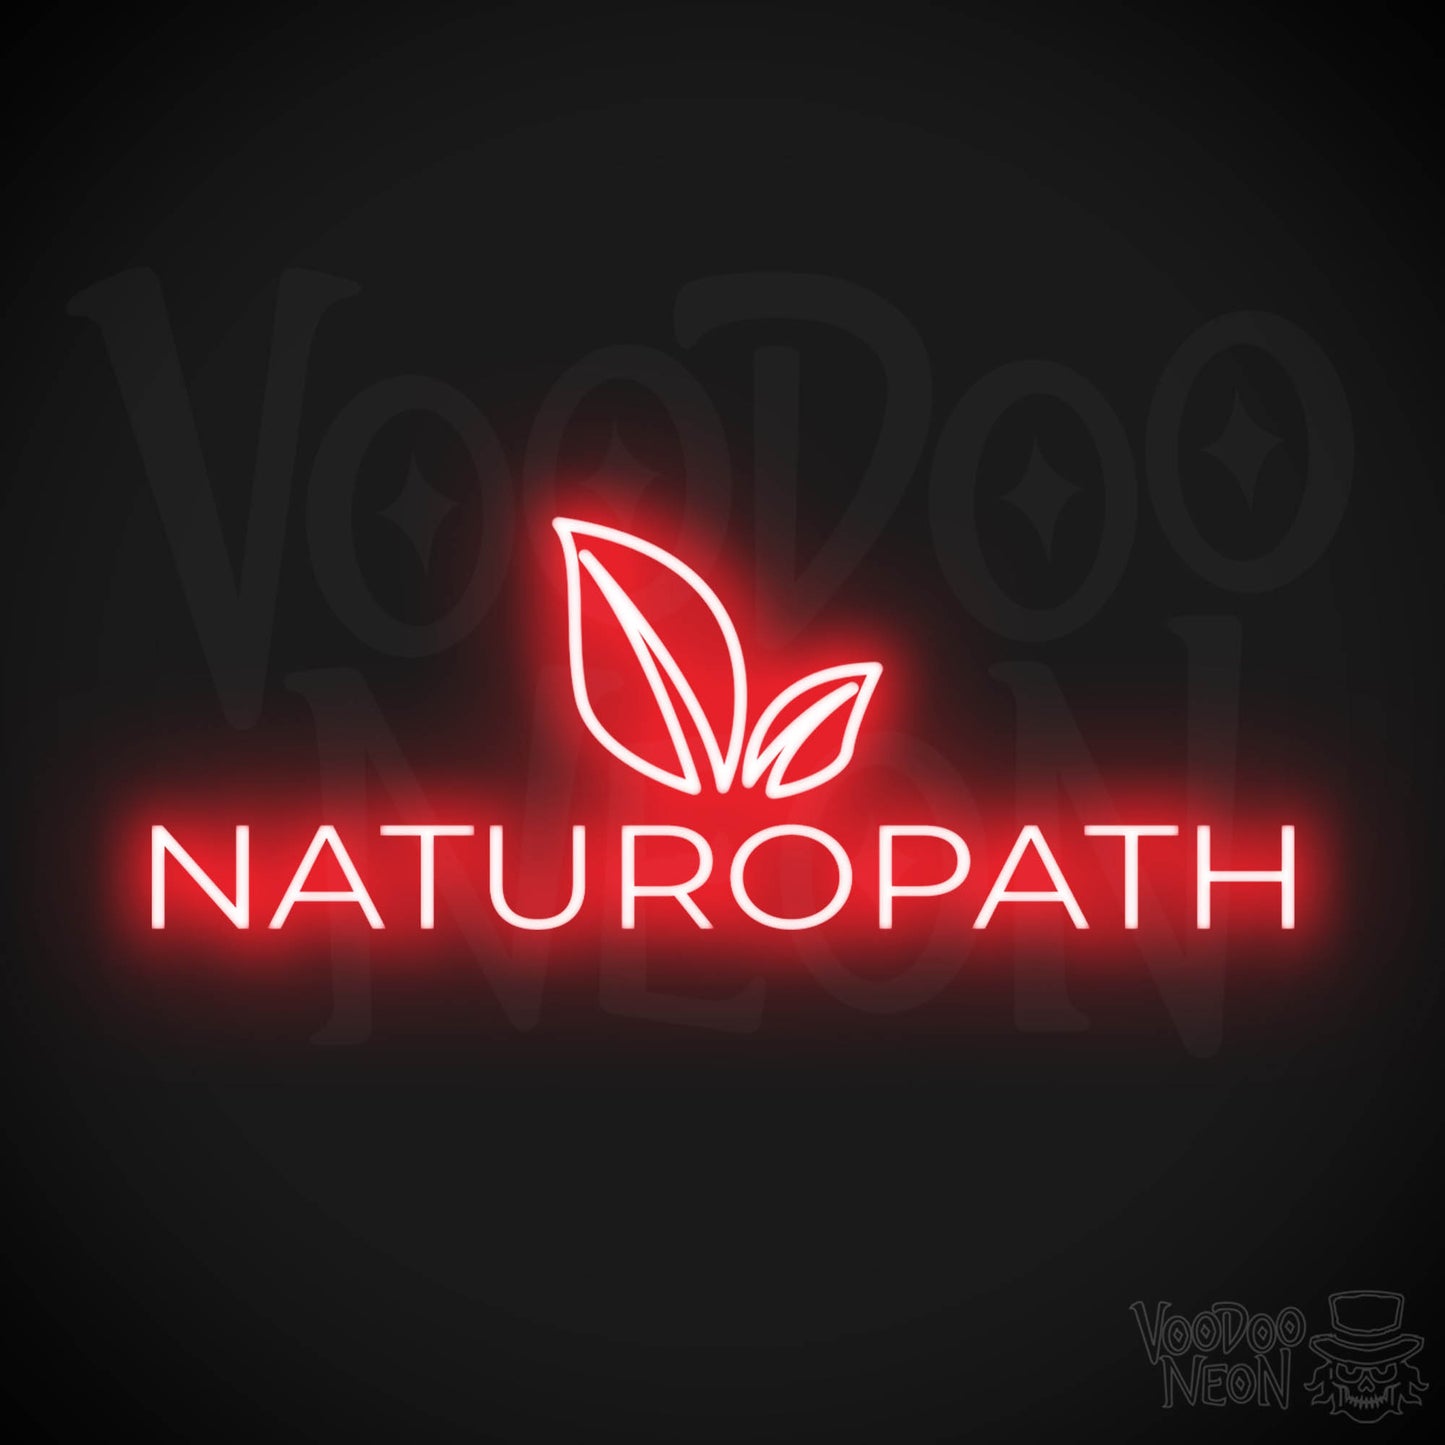 Naturopath LED Neon - Red